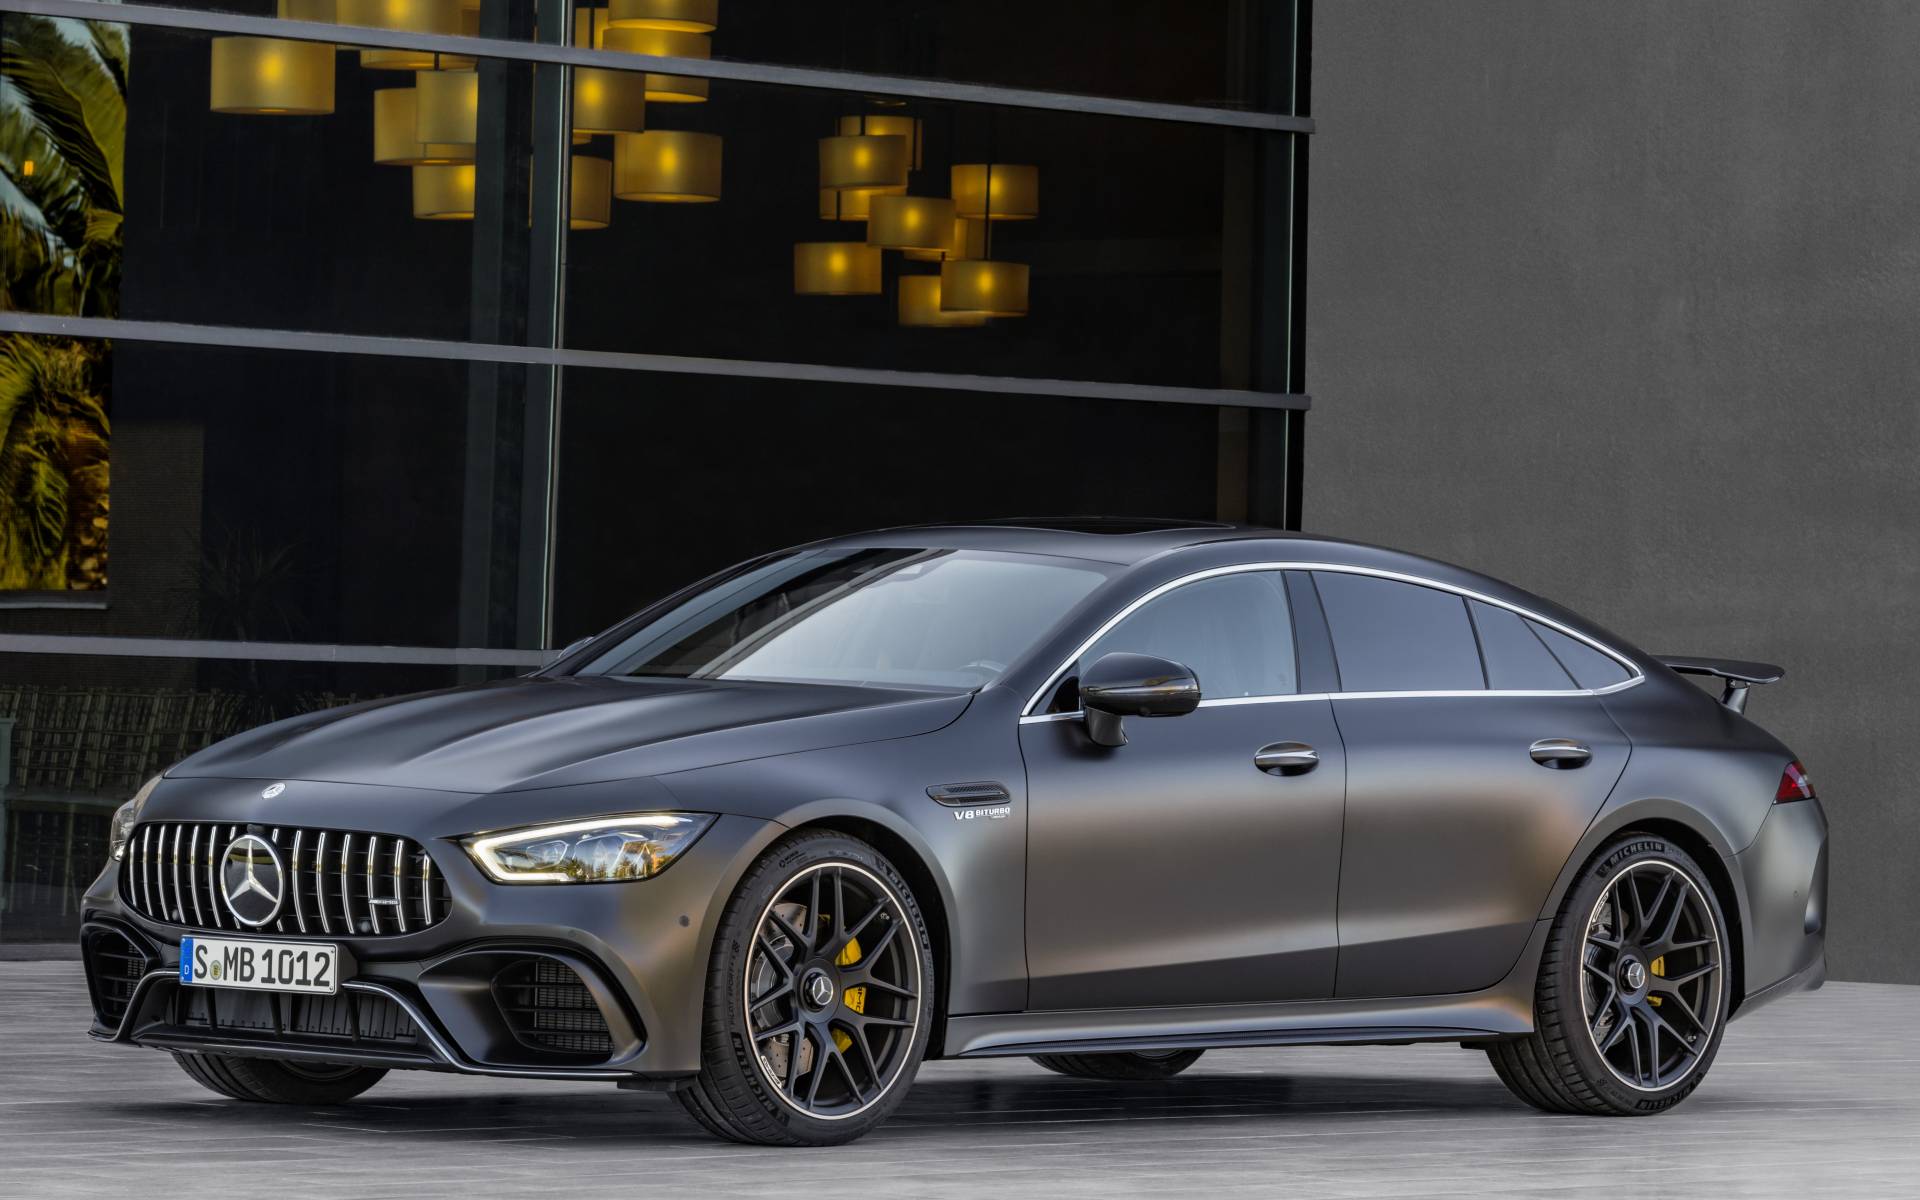 Mercedes Benz Amg Gt 4 Door Coupe News Reviews Picture Galleries And Videos The Car Guide